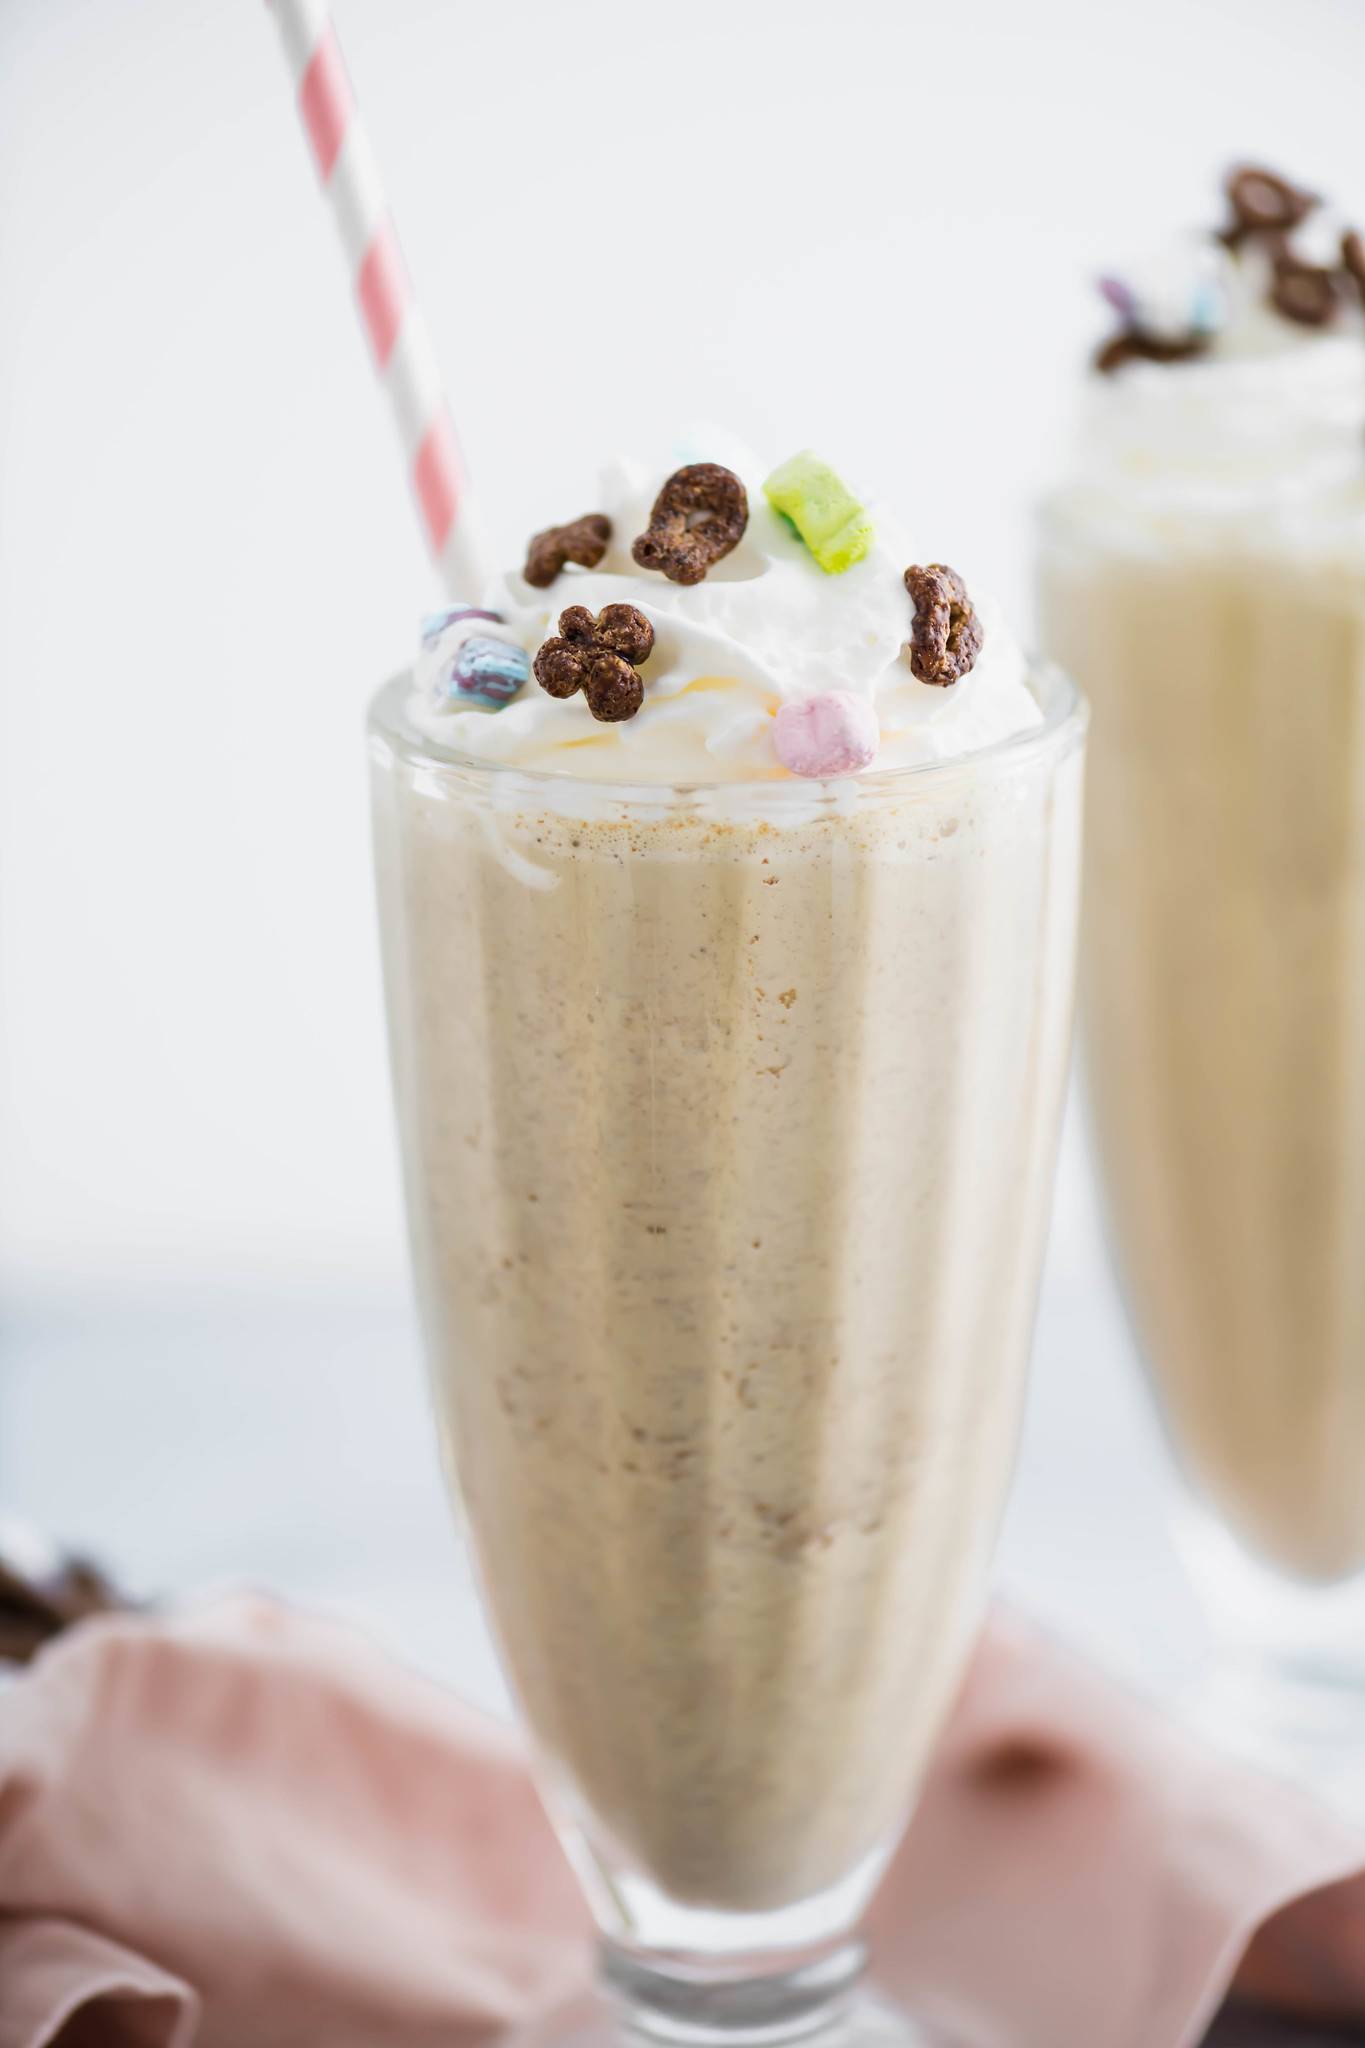 St. Patrick's Day is right around the corner and what better way than to celebrate with a Chocolate Lucky Charms Milkshake. Grab some ice cream, cereal and milk and let's get started.